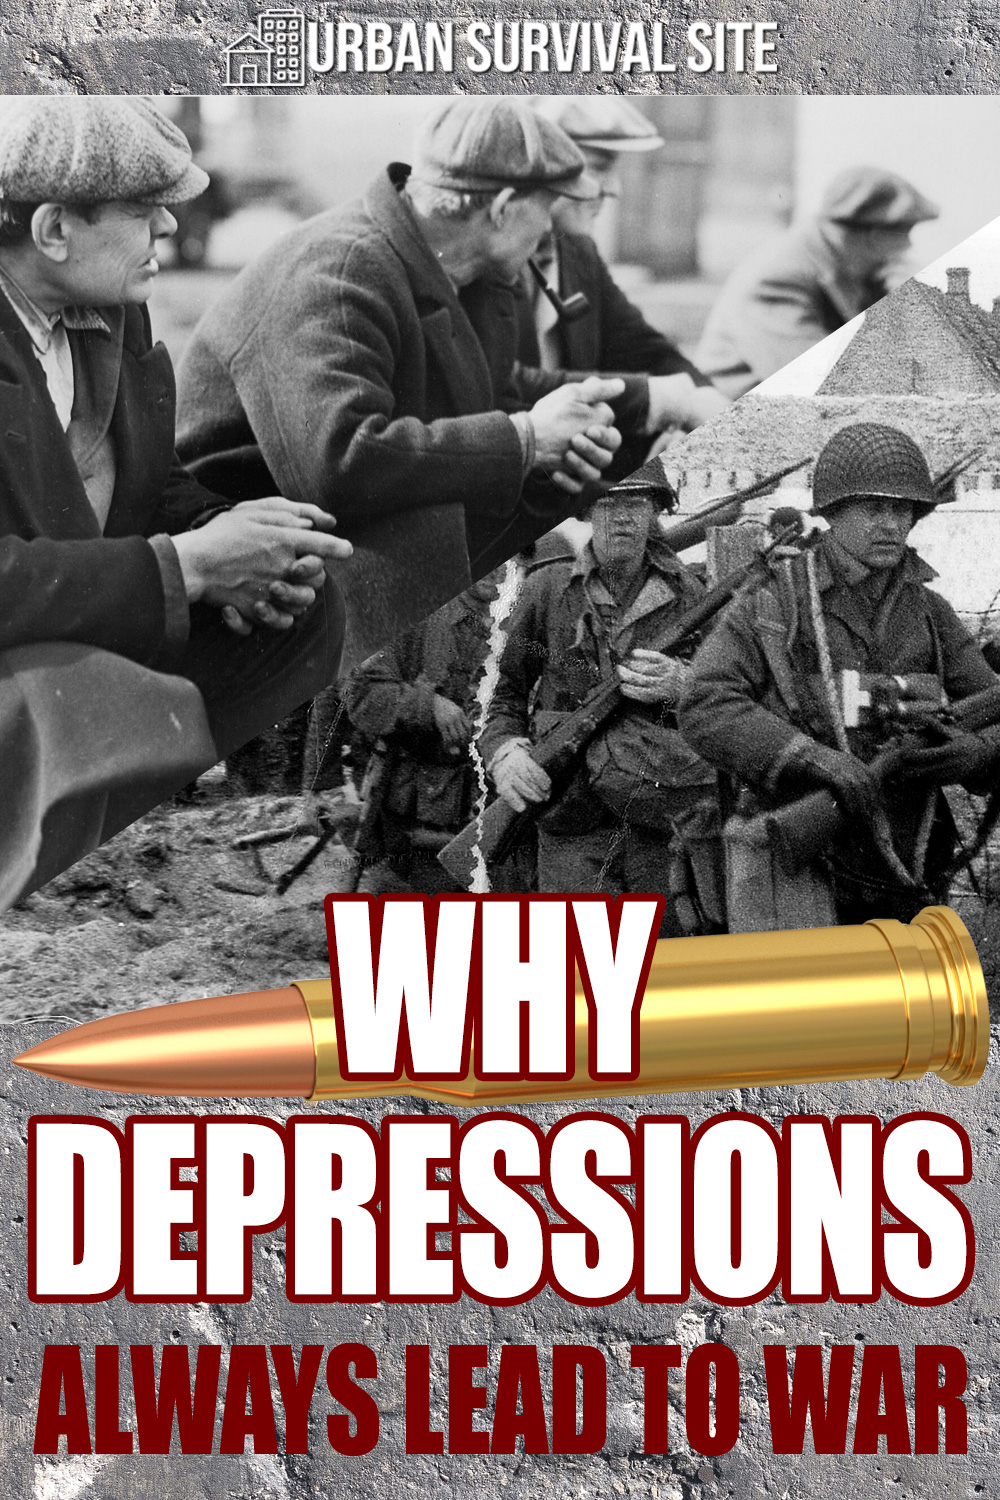 Why Depressions Always Lead To War